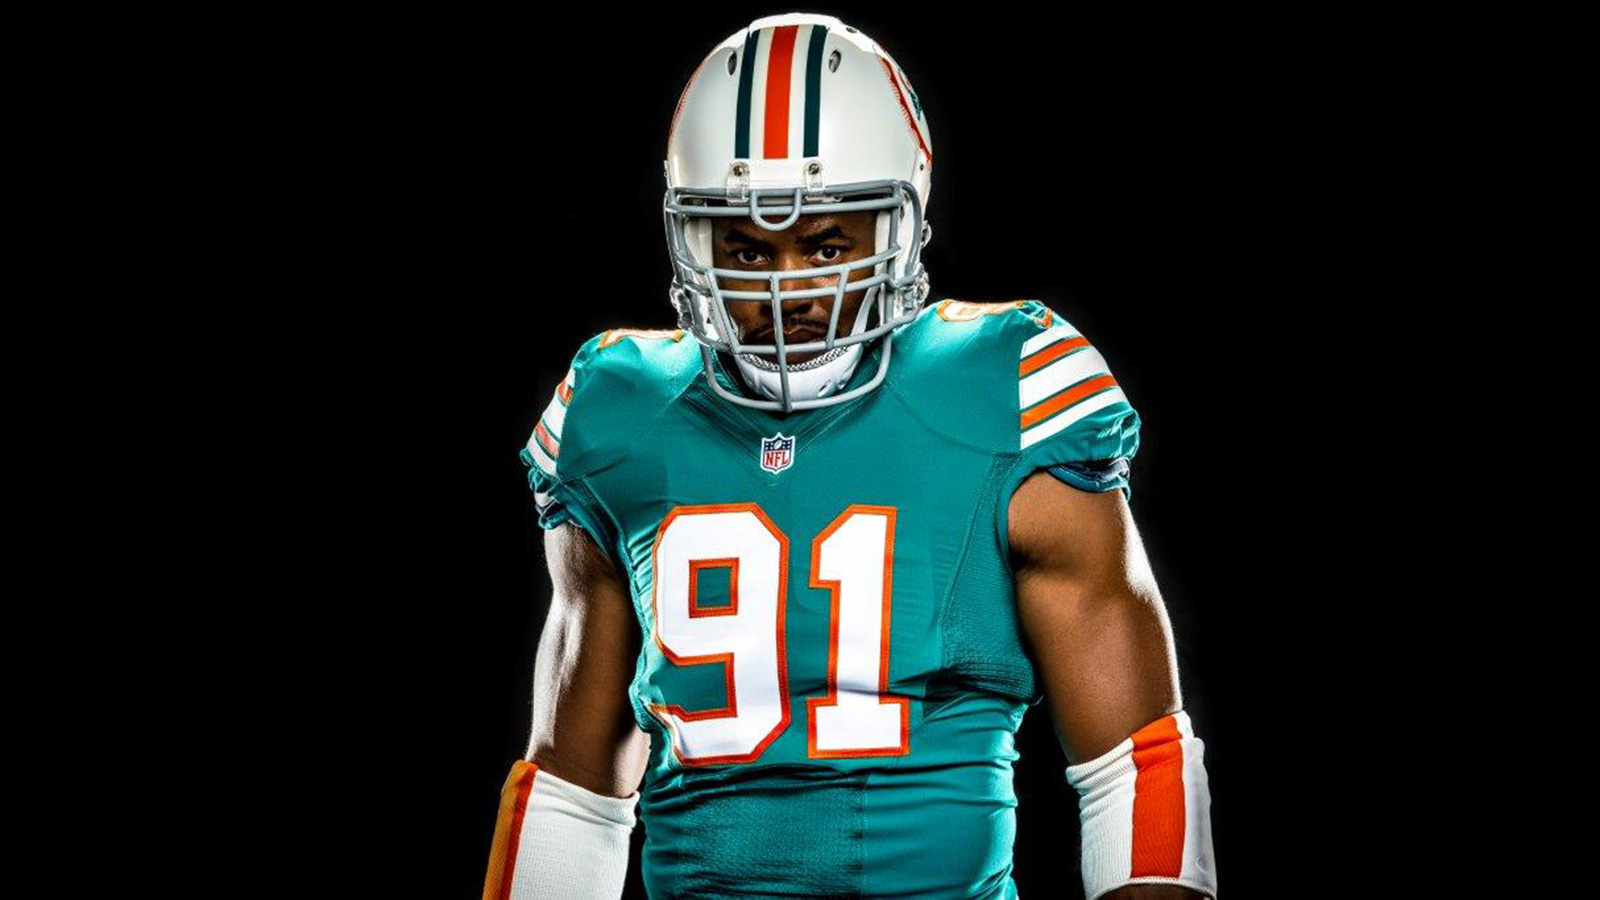 072915_fsf_nfl_Cameron-Wake-in-Dolphins-